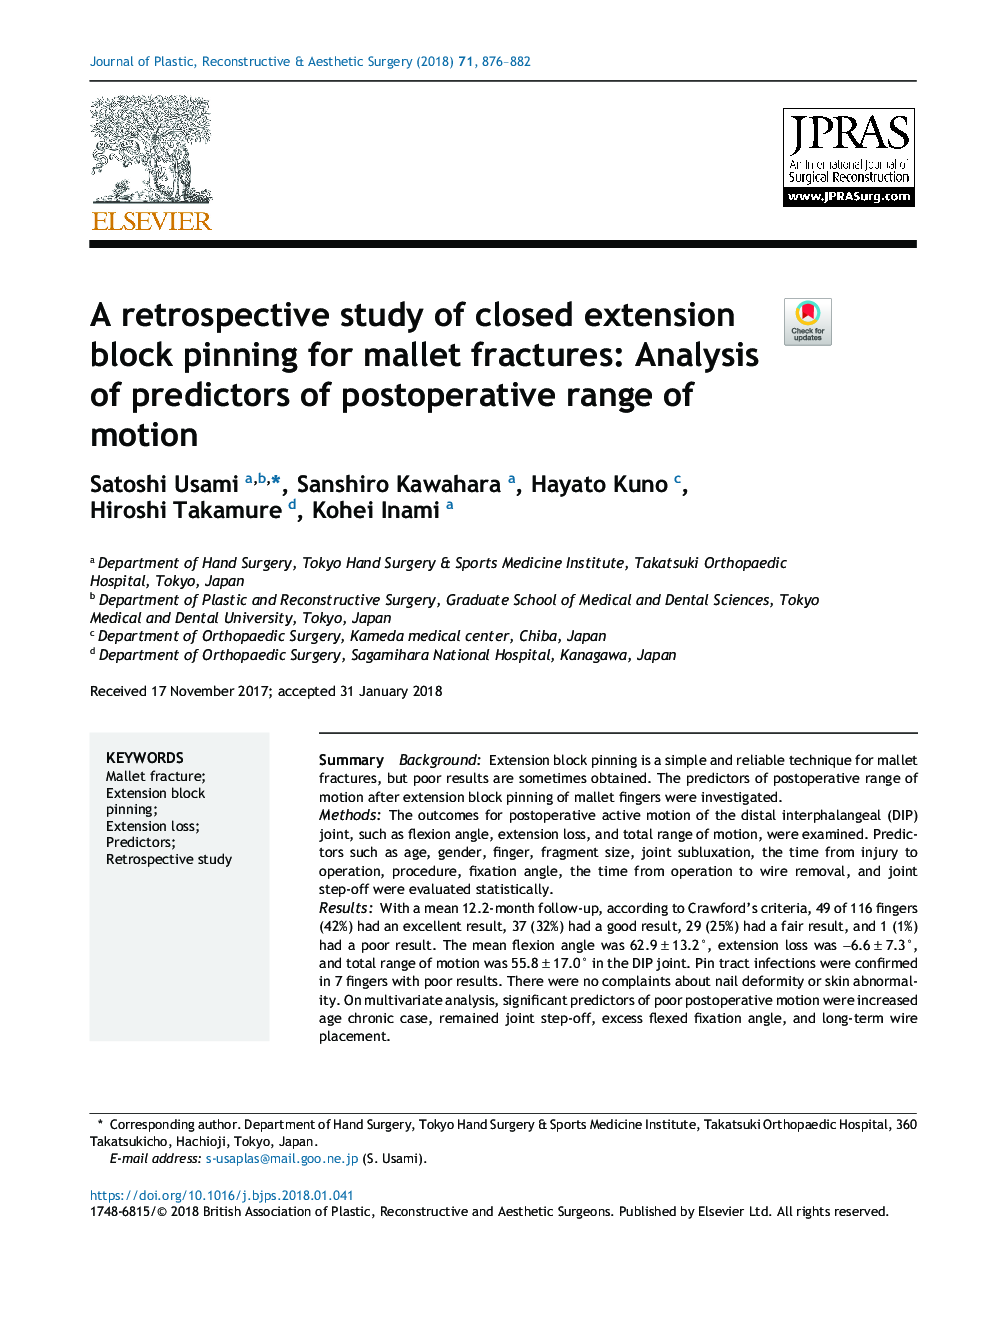 A retrospective study of closed extension block pinning for mallet fractures: Analysis of predictors of postoperative range of motion